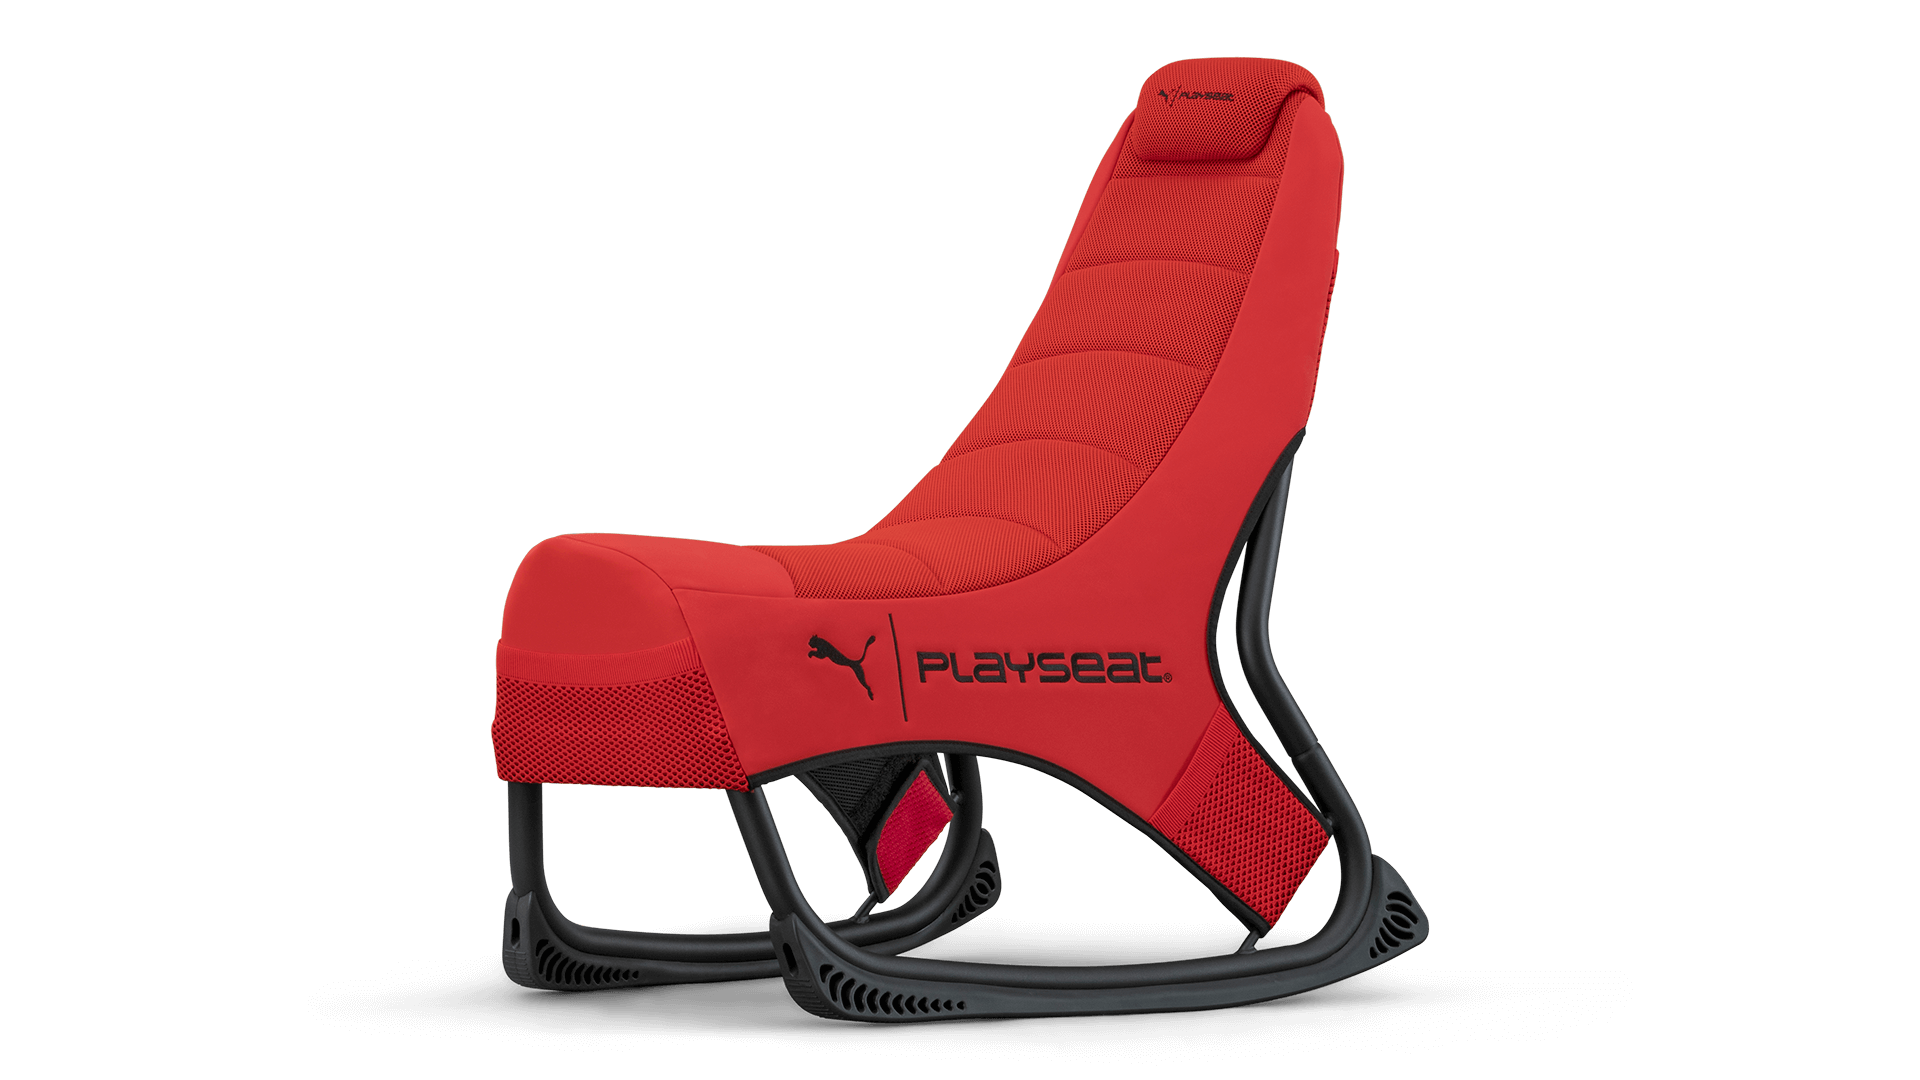 playseat-go-puma-active-red-gaming-seat-front-angle-view-48-1920x1080.png